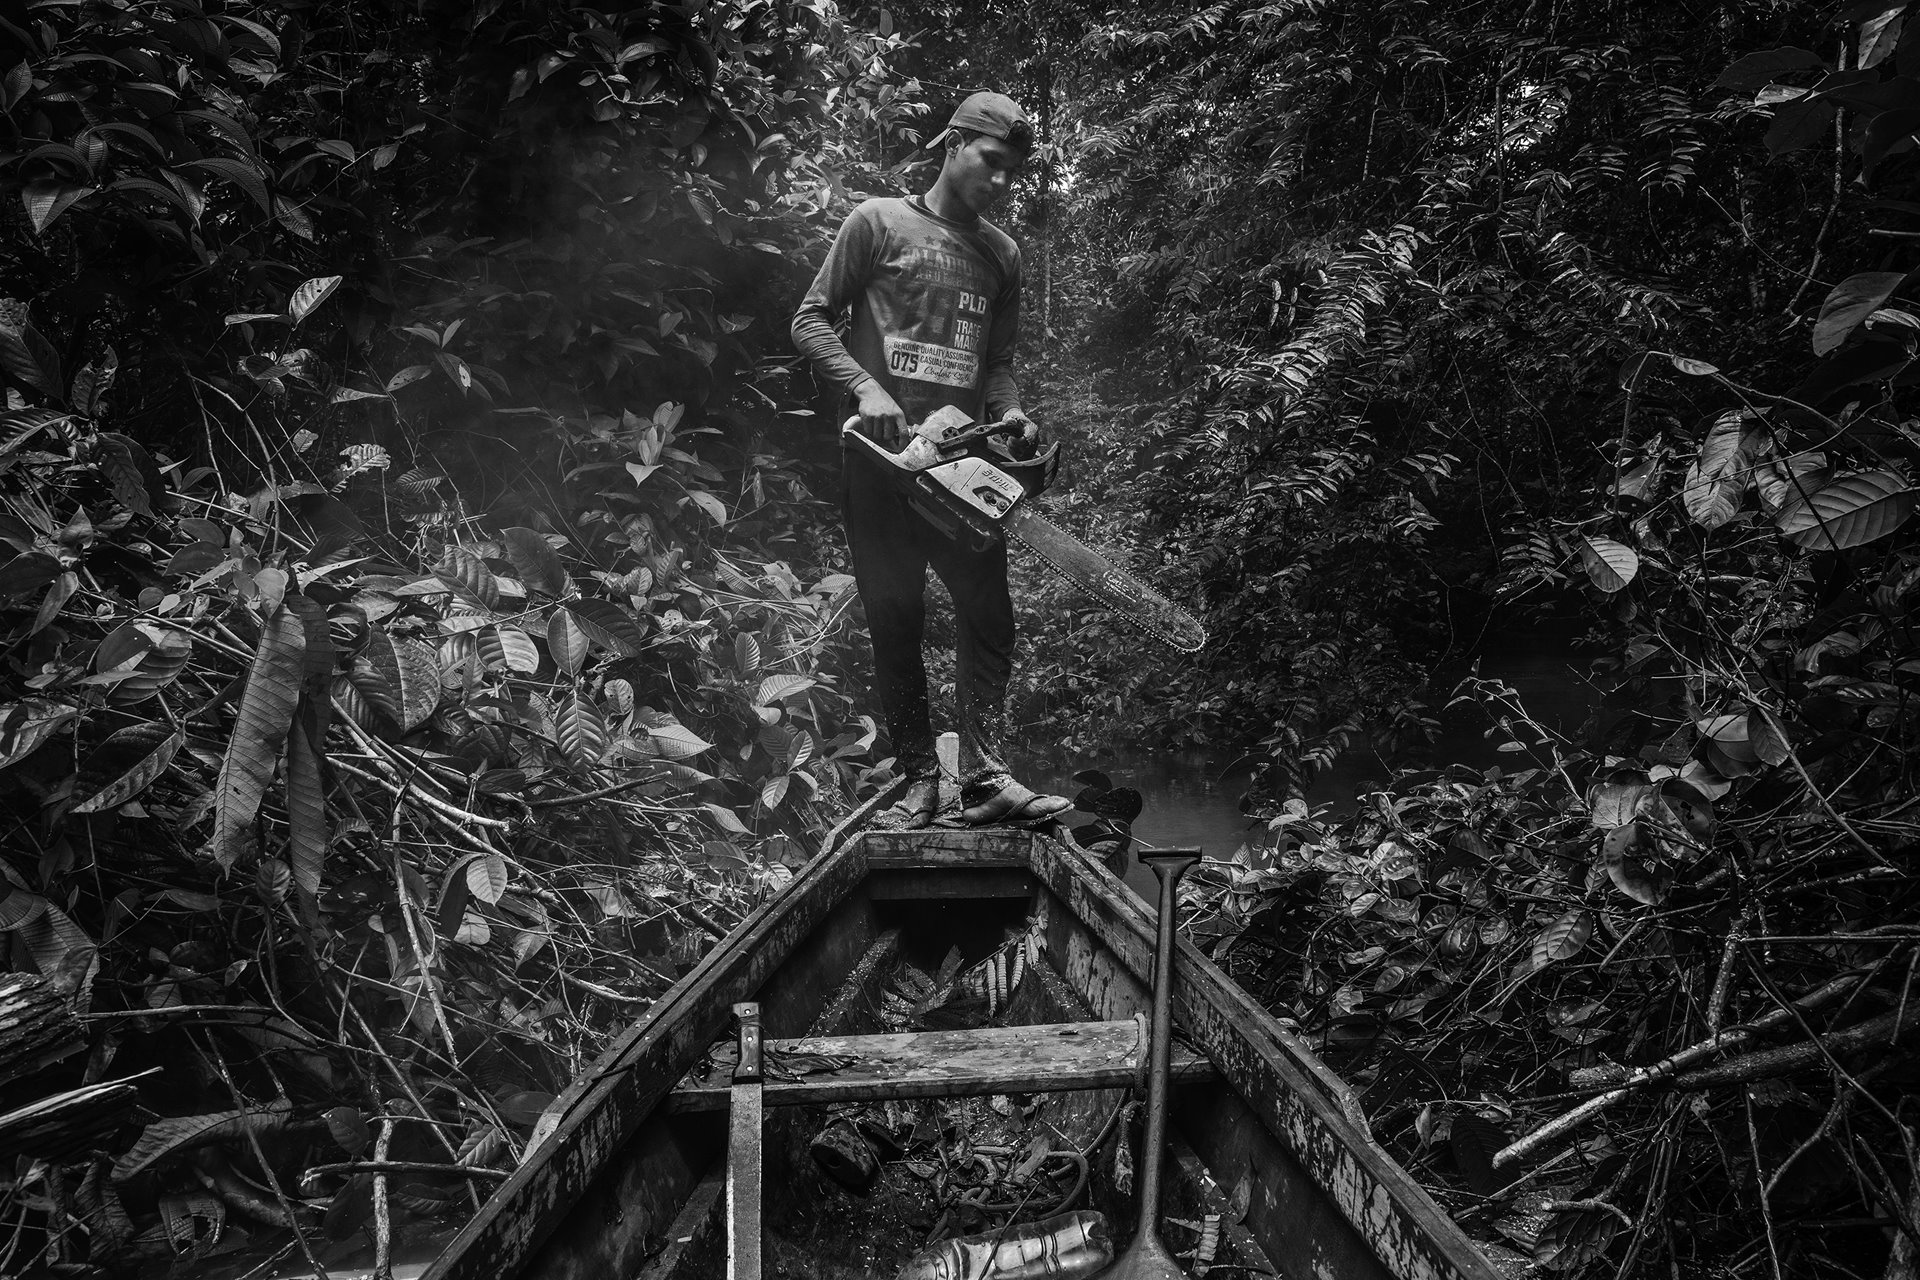 Jasson Oliveira do Nascimento, a resident of the Arapixi Extractive Reserve in the Brazilian Amazon, uses a chainsaw to clear a path for his canoe on his way to collect Brazil nuts. The reserve was established in 2006 as a protected area with sustainable use of natural resources, to safeguard livelihoods and culture of the traditional extractive population. The aim was to protect the area against large-scale soybean farming and cattle ranching, but it is currently being invaded by land-grabbers, who are deforesting the jungle and threatening the way of life of the 300 families who live there.